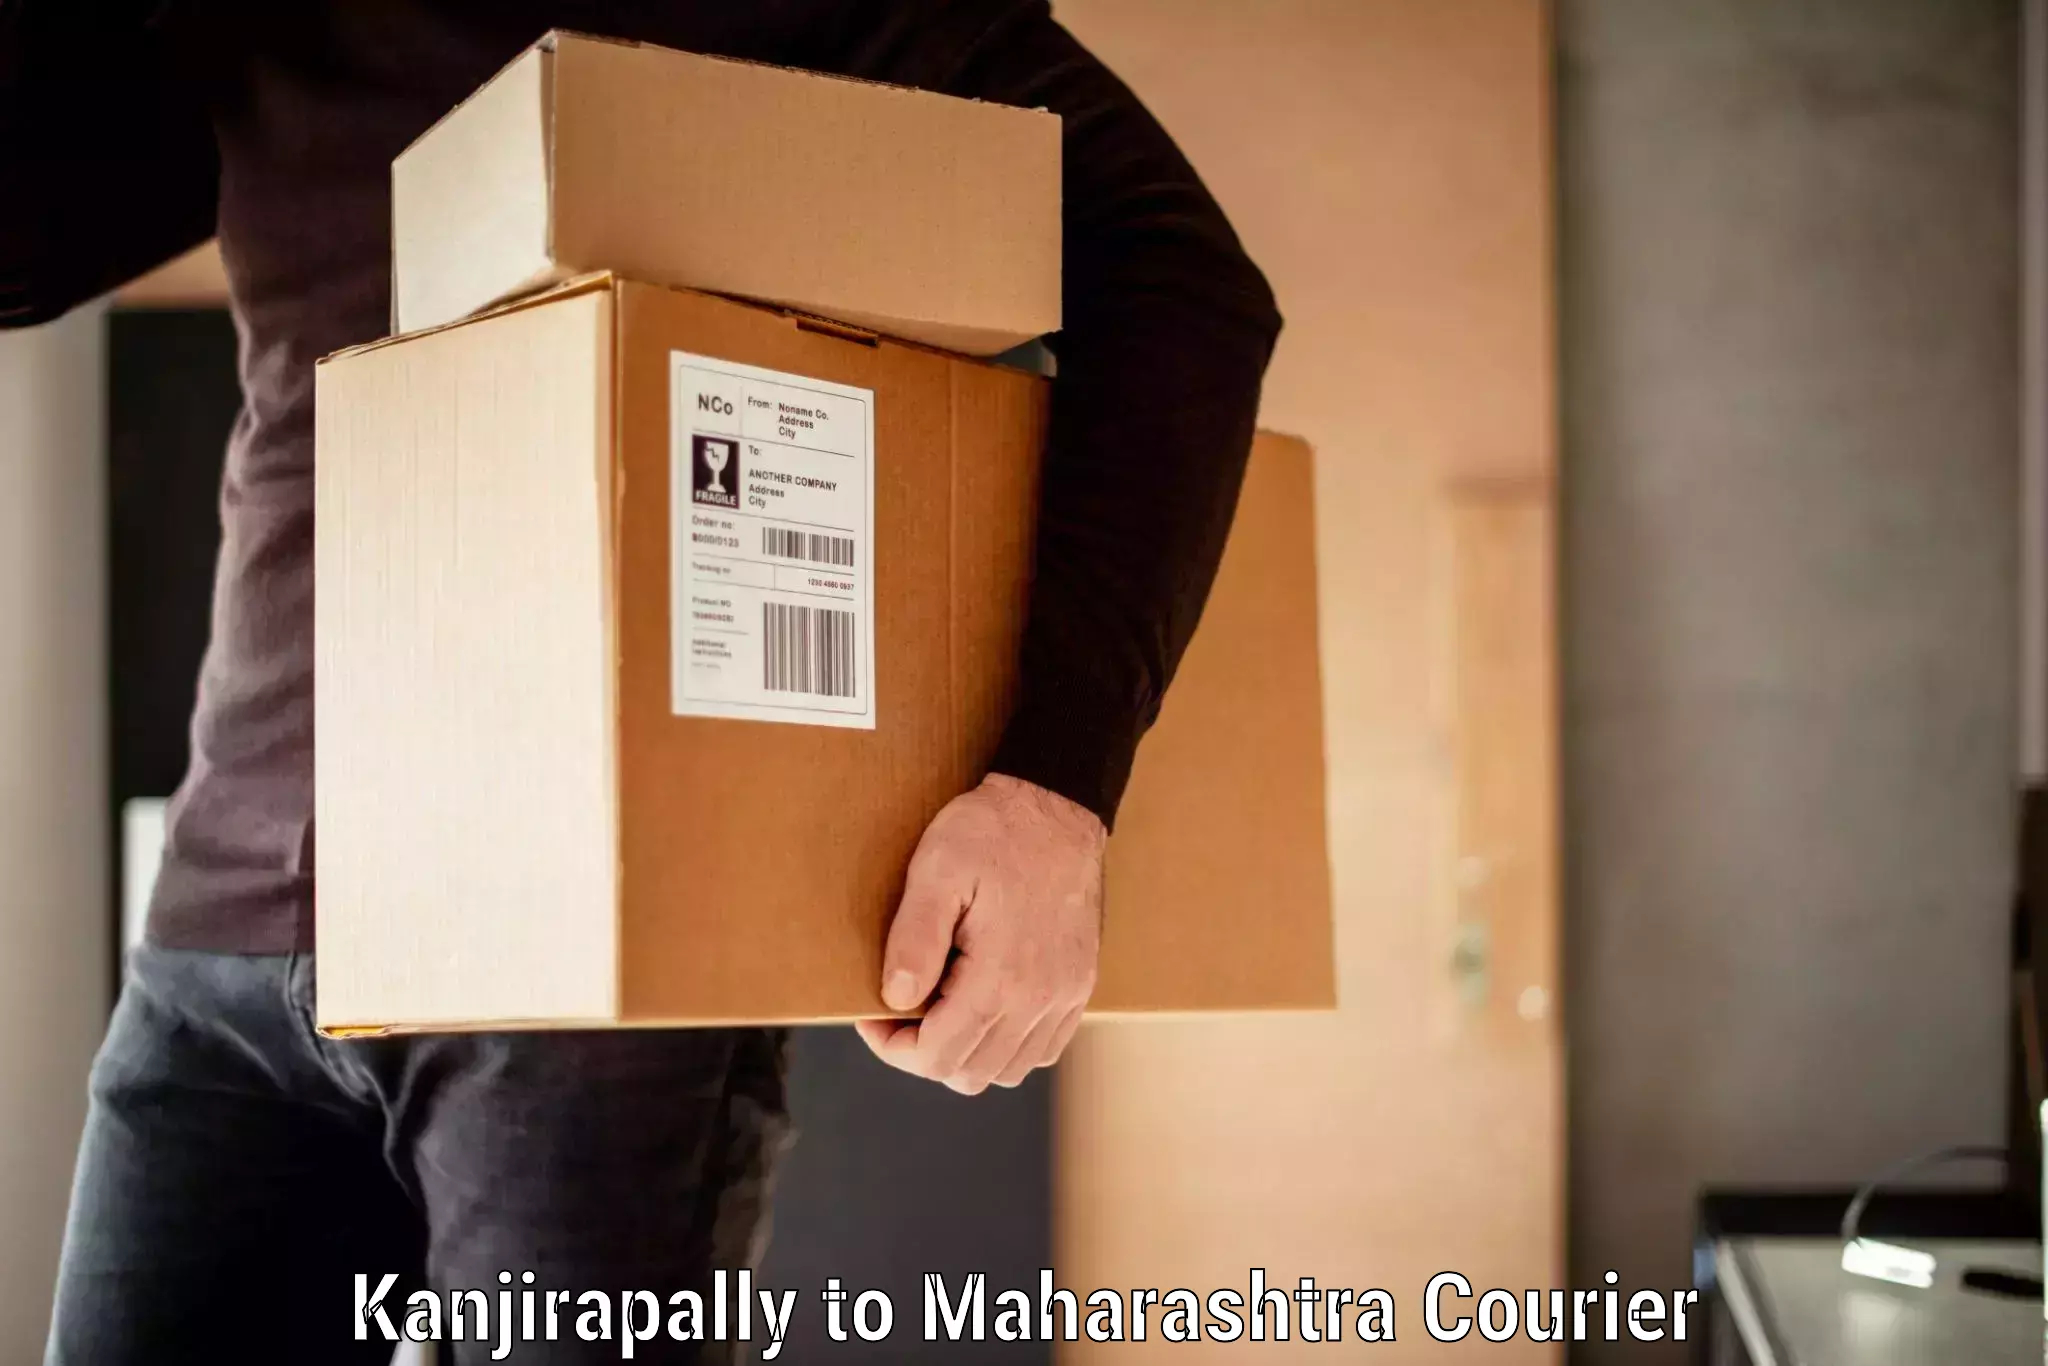 Luggage transport consulting Kanjirapally to Chandrapur